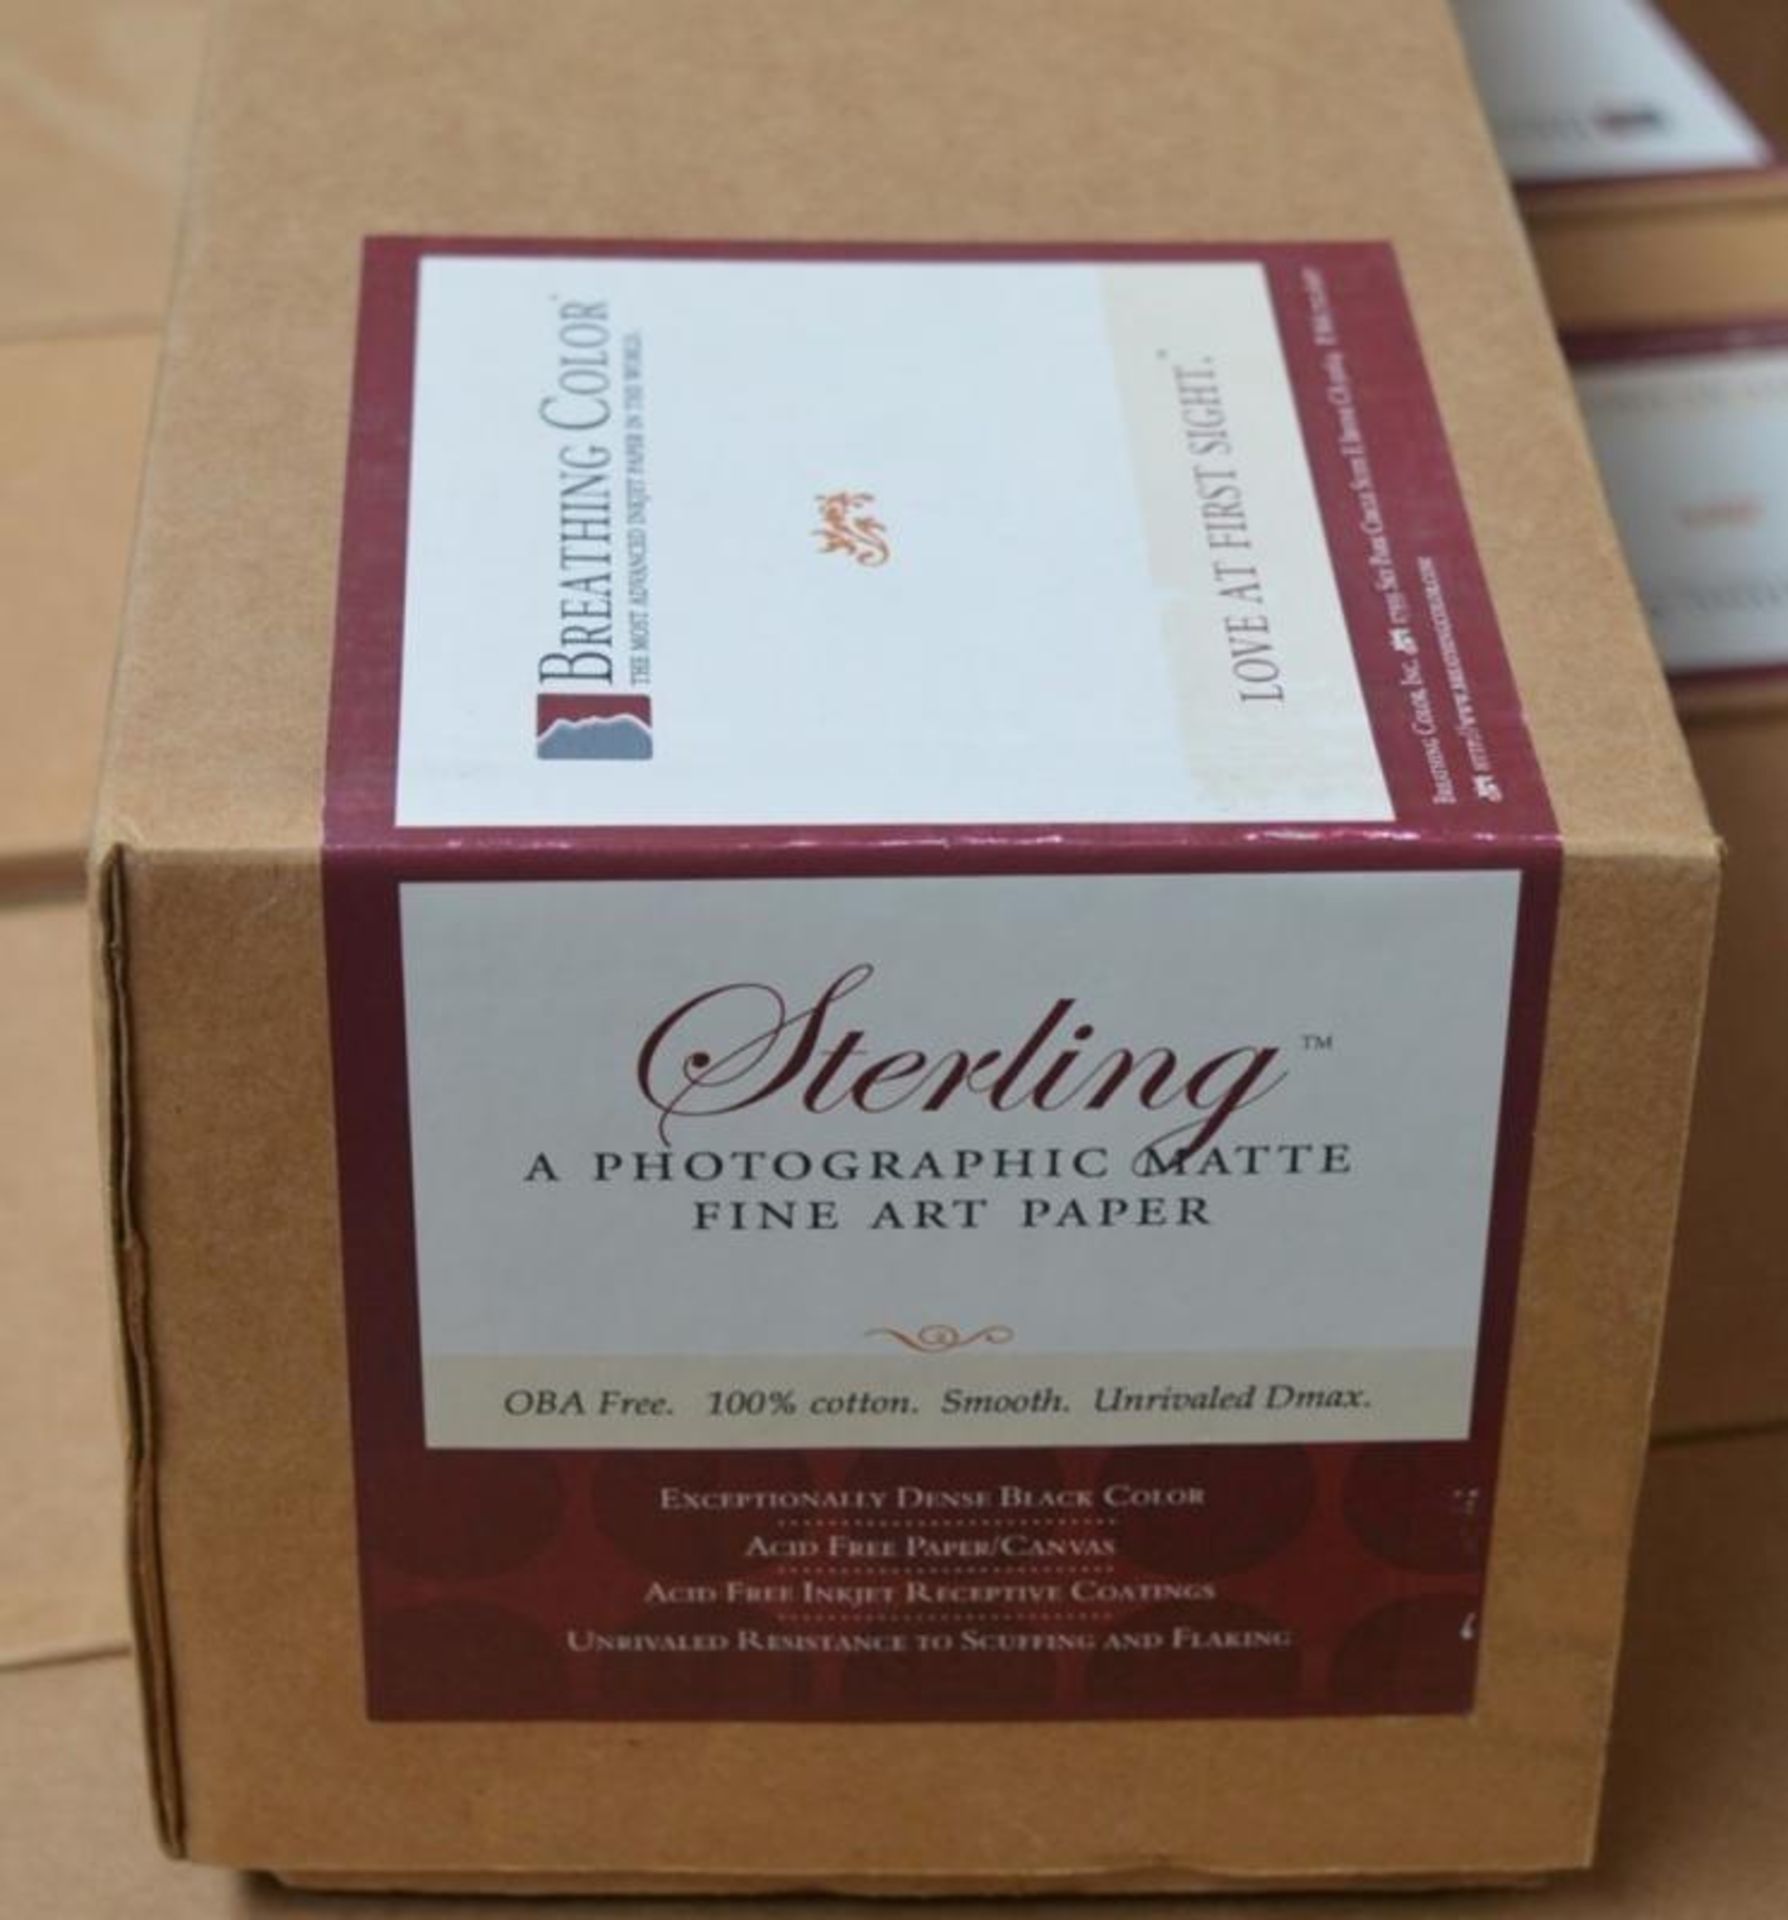 1 x Roll of Breathing Colour STERLING Photographic Matte Fine Art Paper - Size 24" x 40' - 205gsm - - Image 2 of 6